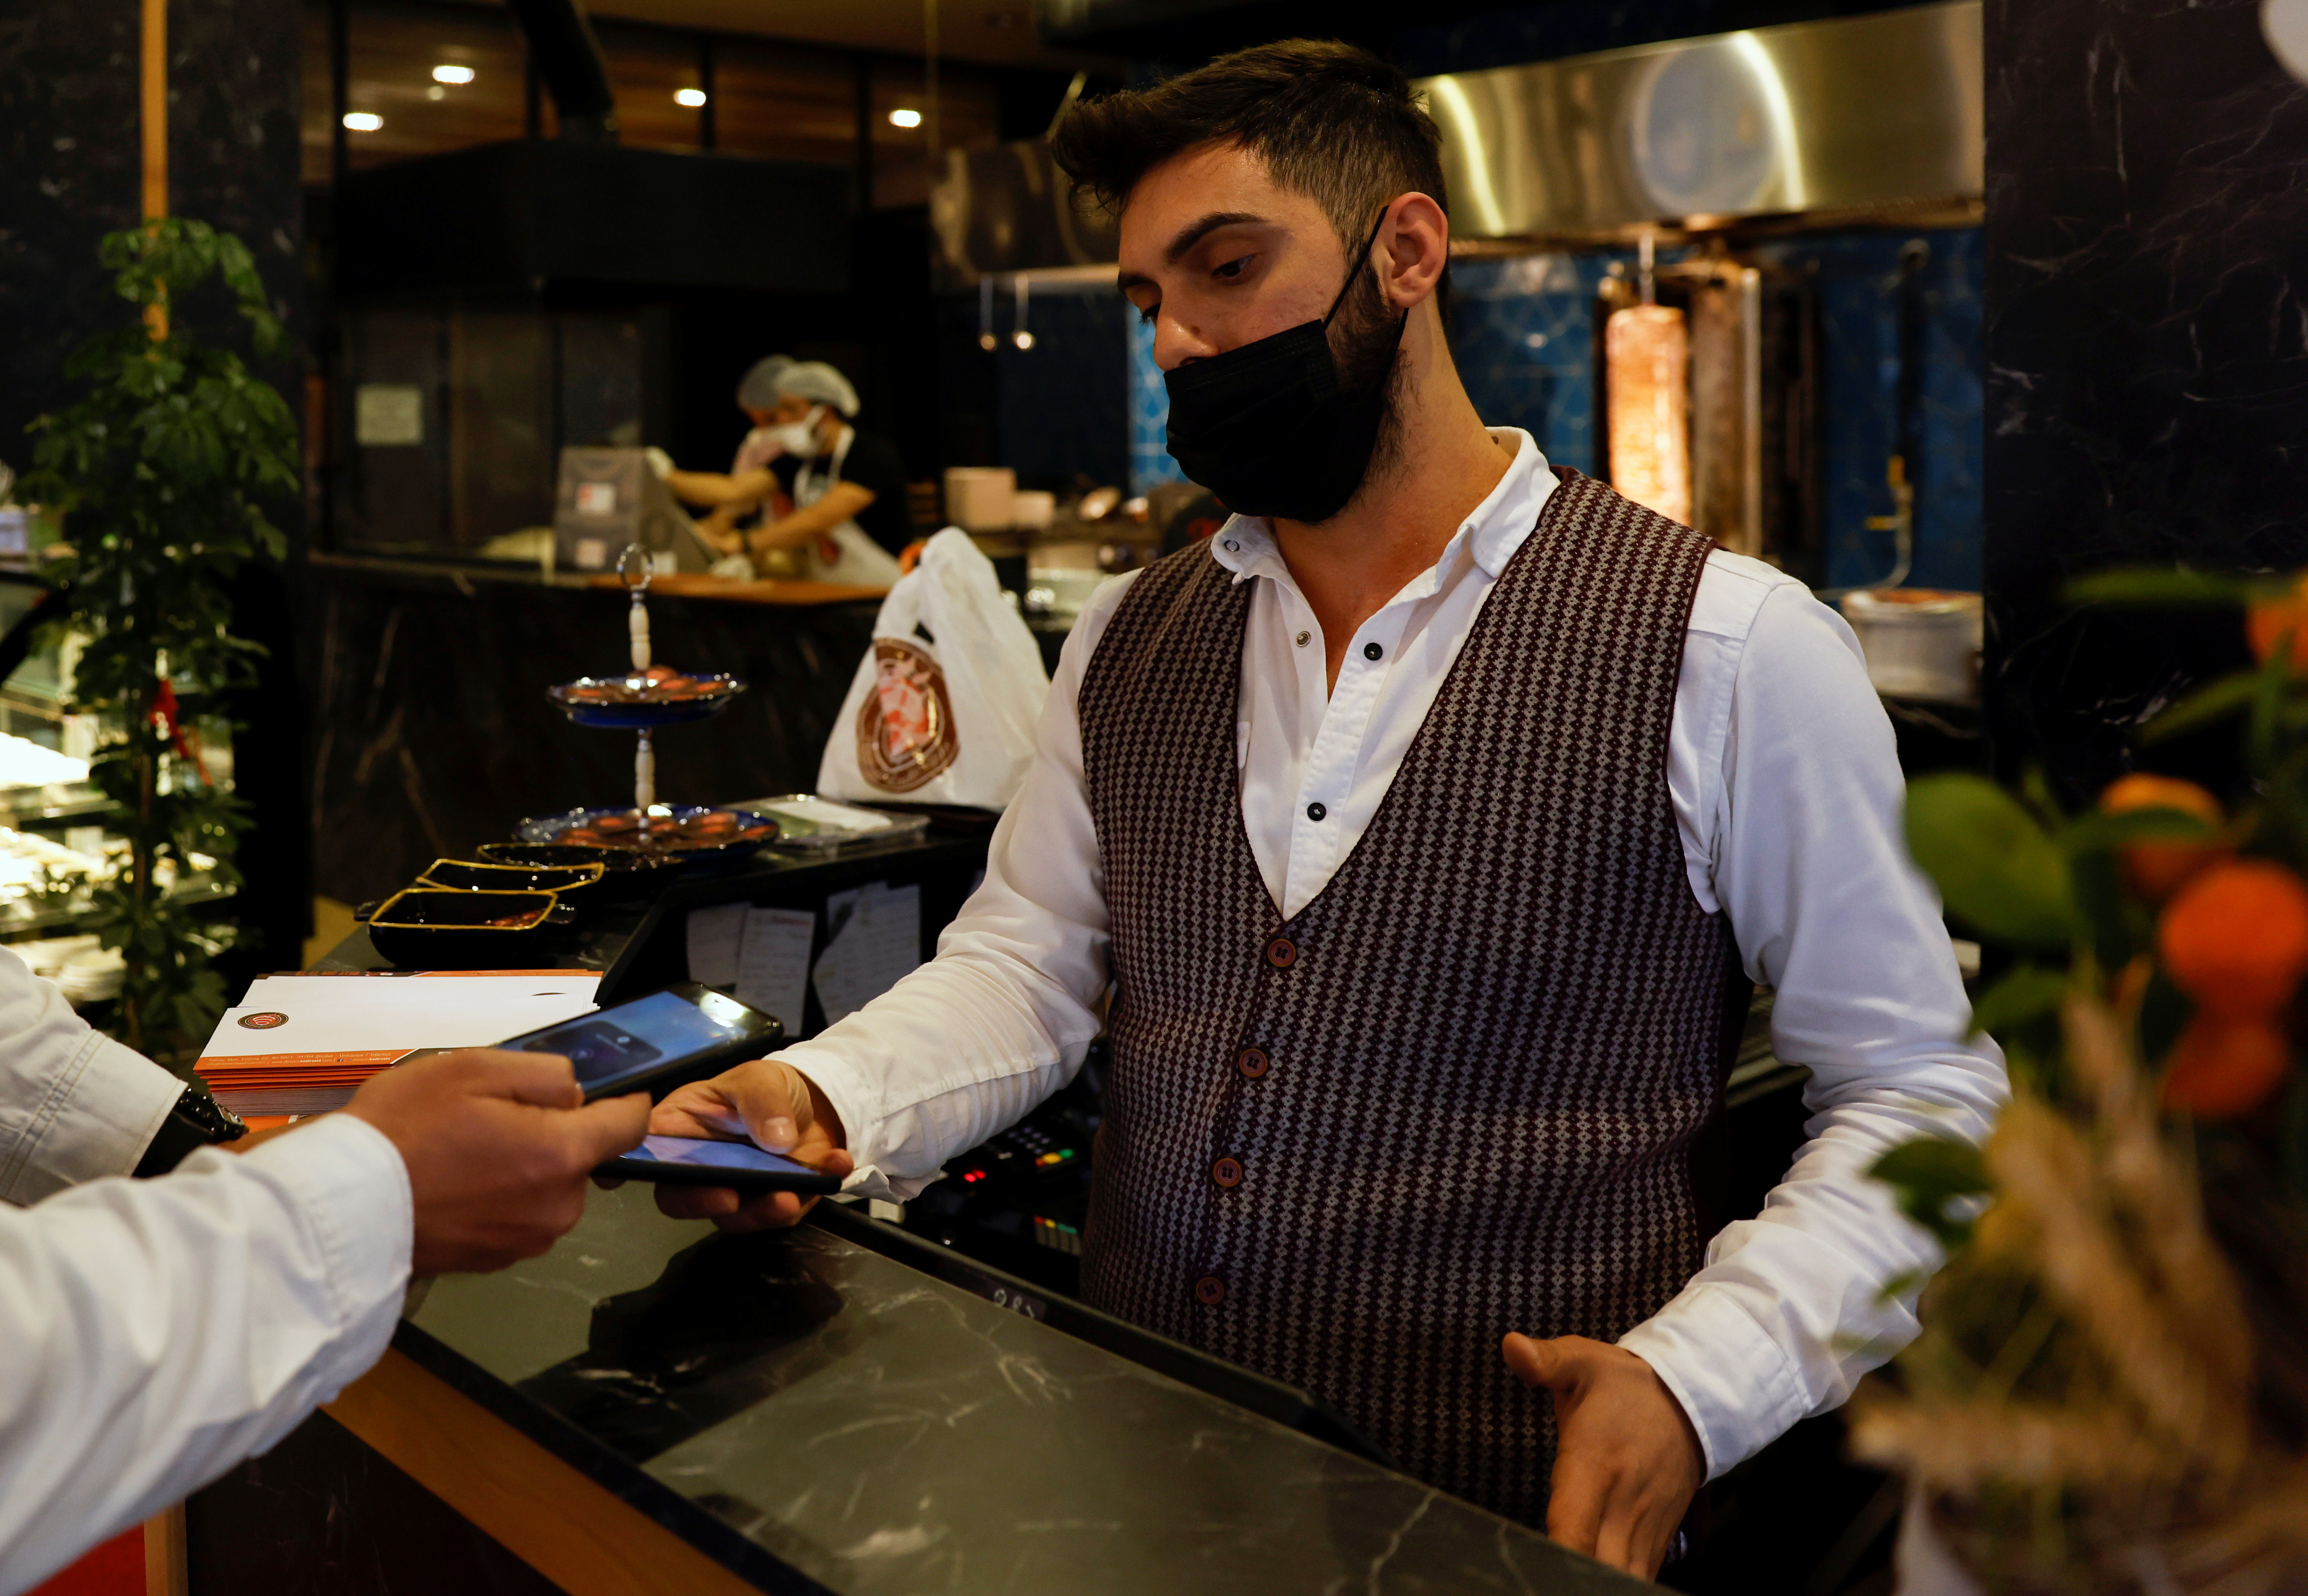 glA cashier recieves a payment via a cryptocurrency app at a kebab restaurant that accepts Bitcoin and Dexchain in Istanbul